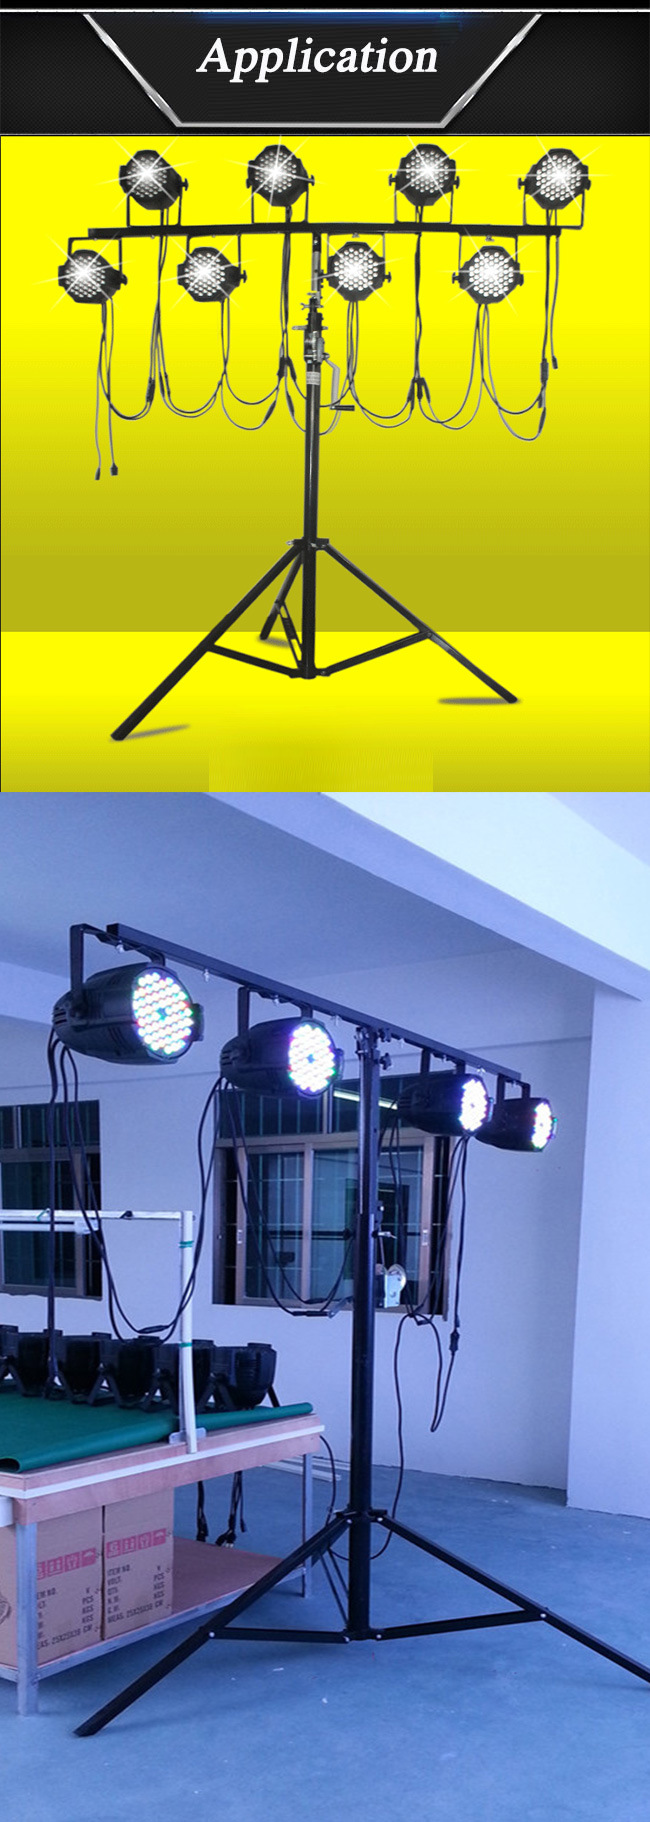 4.5m Mobile Lighting Stand Truss Tower Stand with 2 Clamps